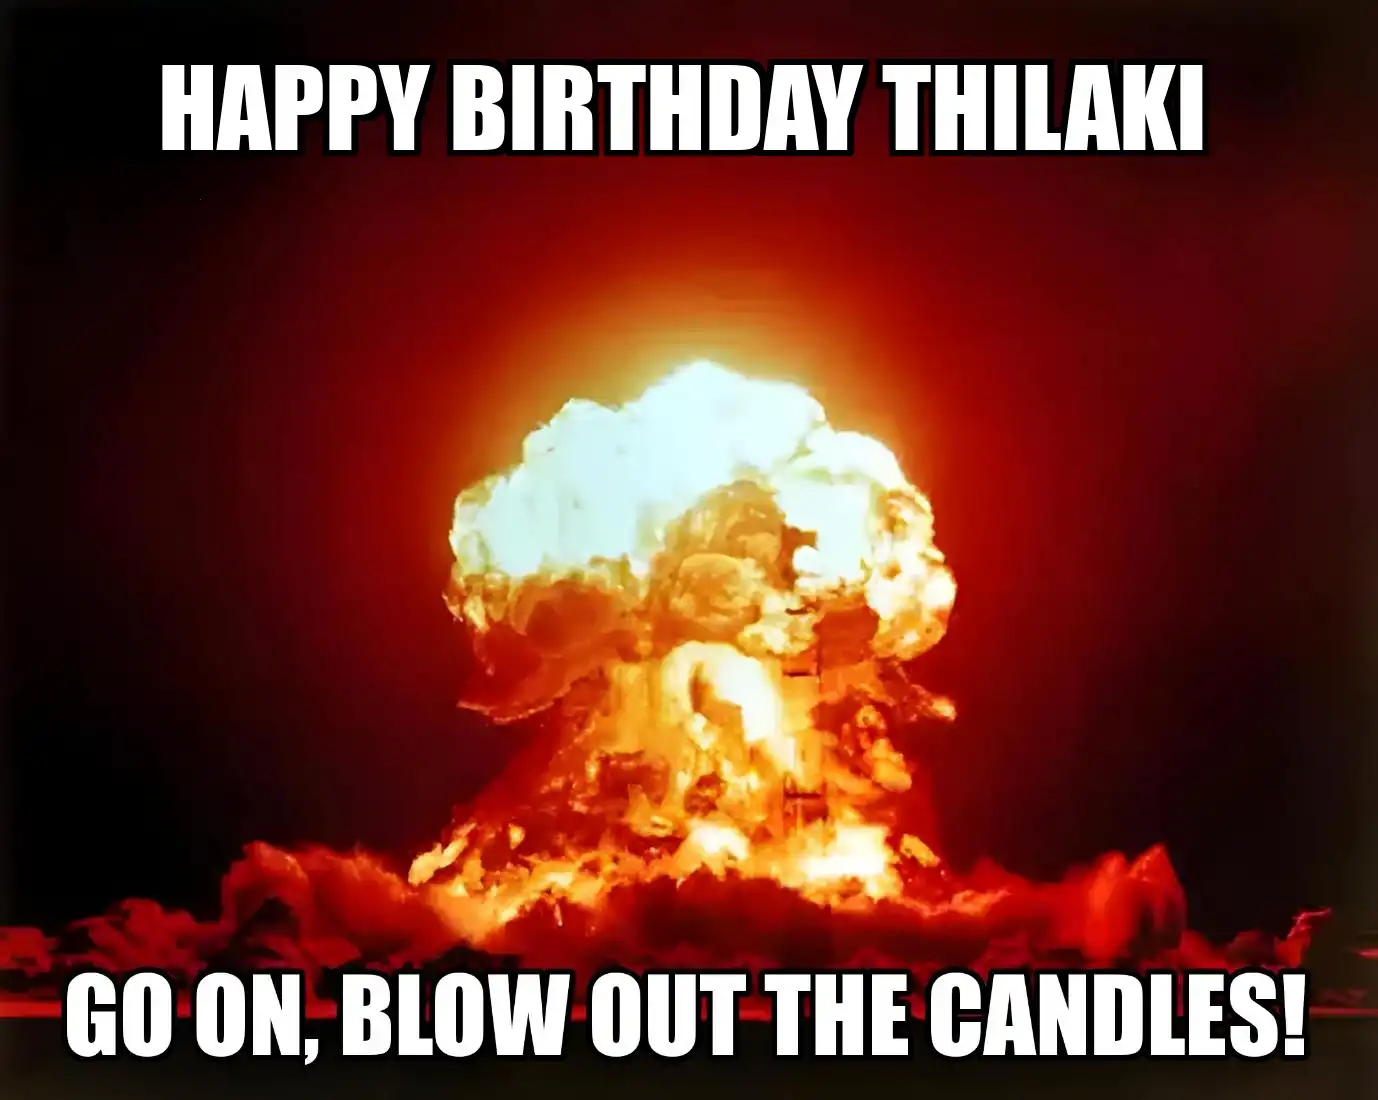 Happy Birthday Thilaki Go On Blow Out The Candles Meme